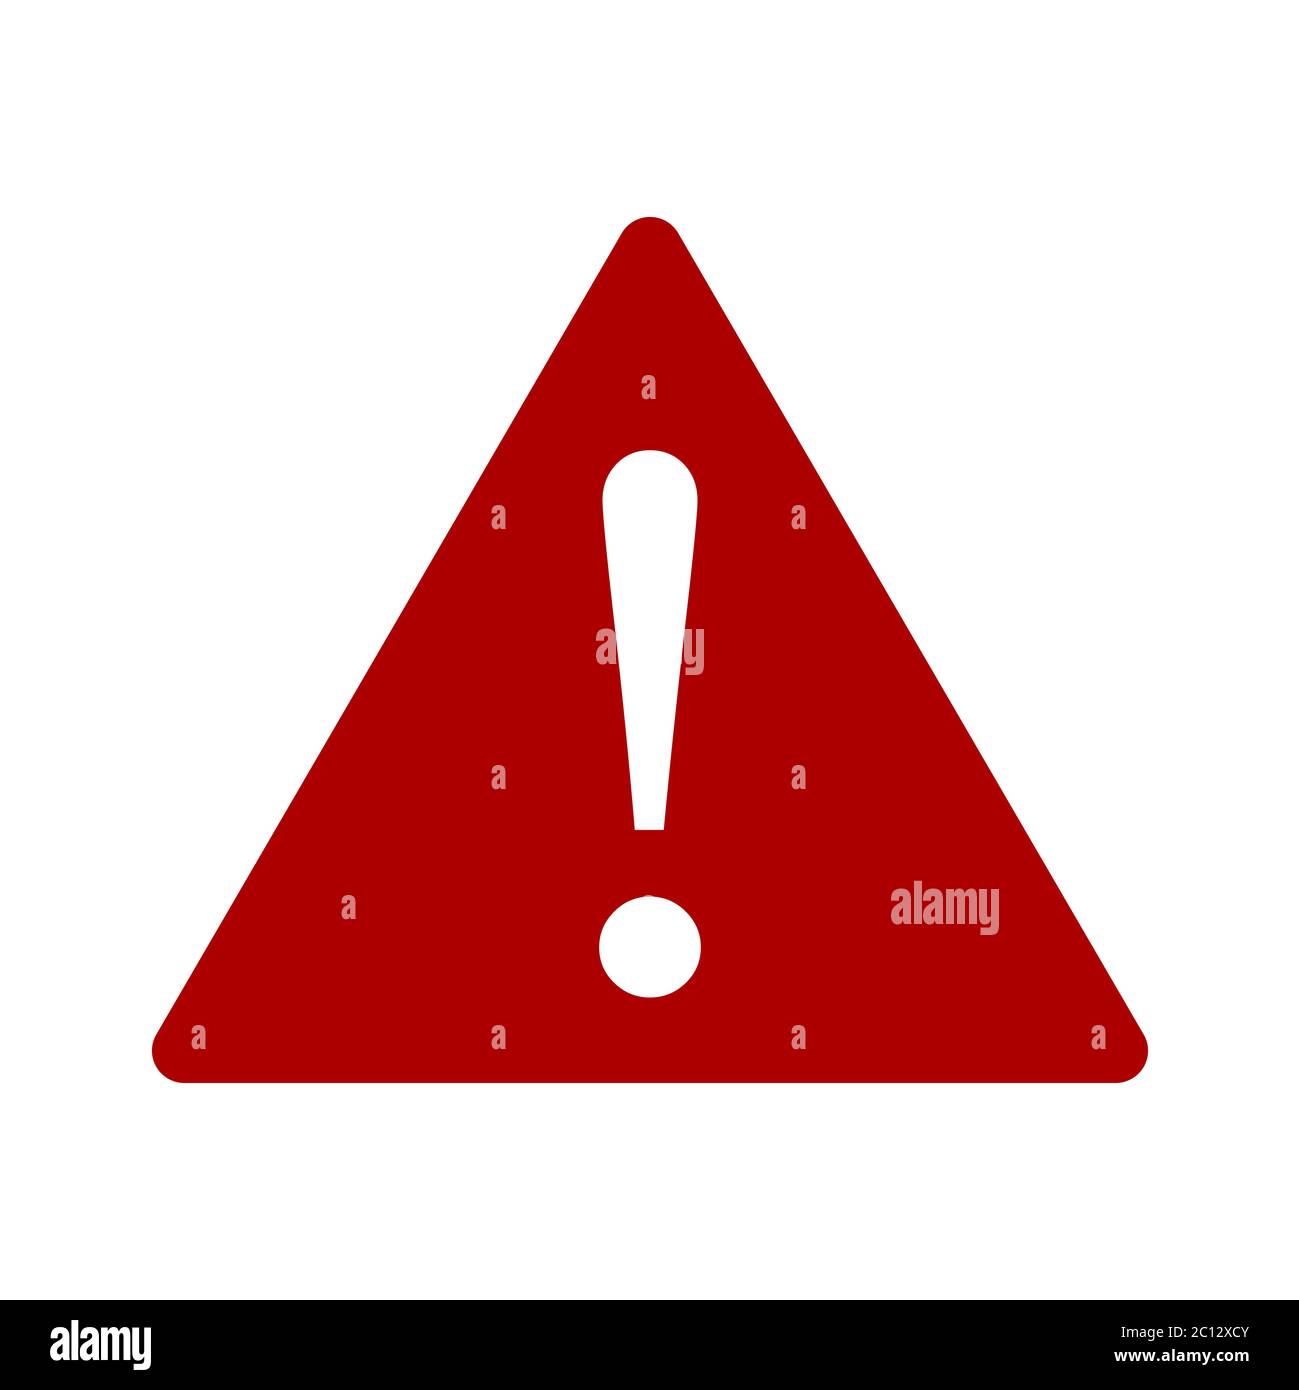 Triangular Warning or Attention Sign with Exclamation Mark. Vector Image. Stock Vector